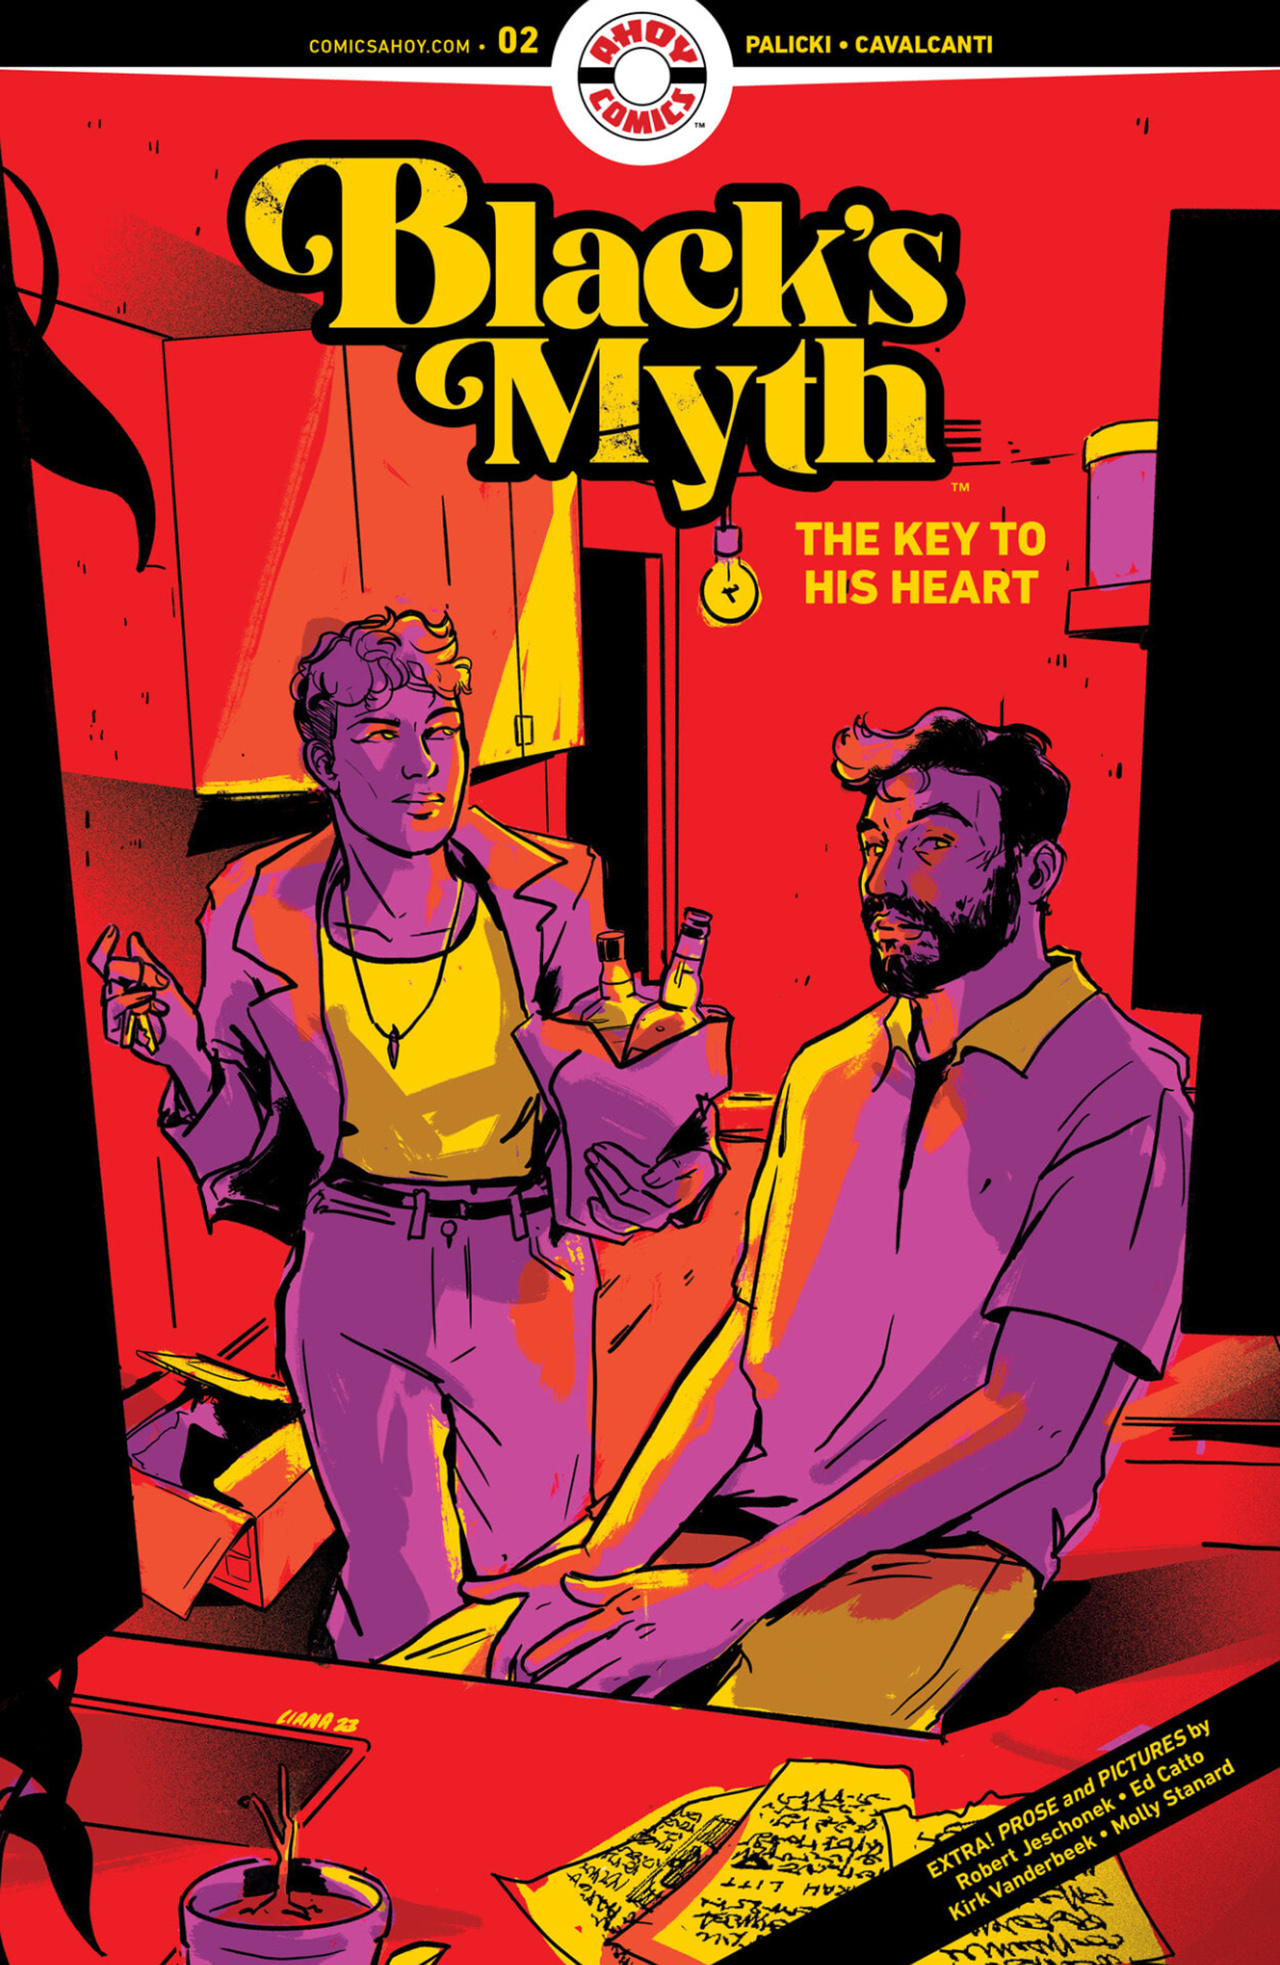 Read online Black’s Myth: The Key to His Heart comic -  Issue #2 - 1